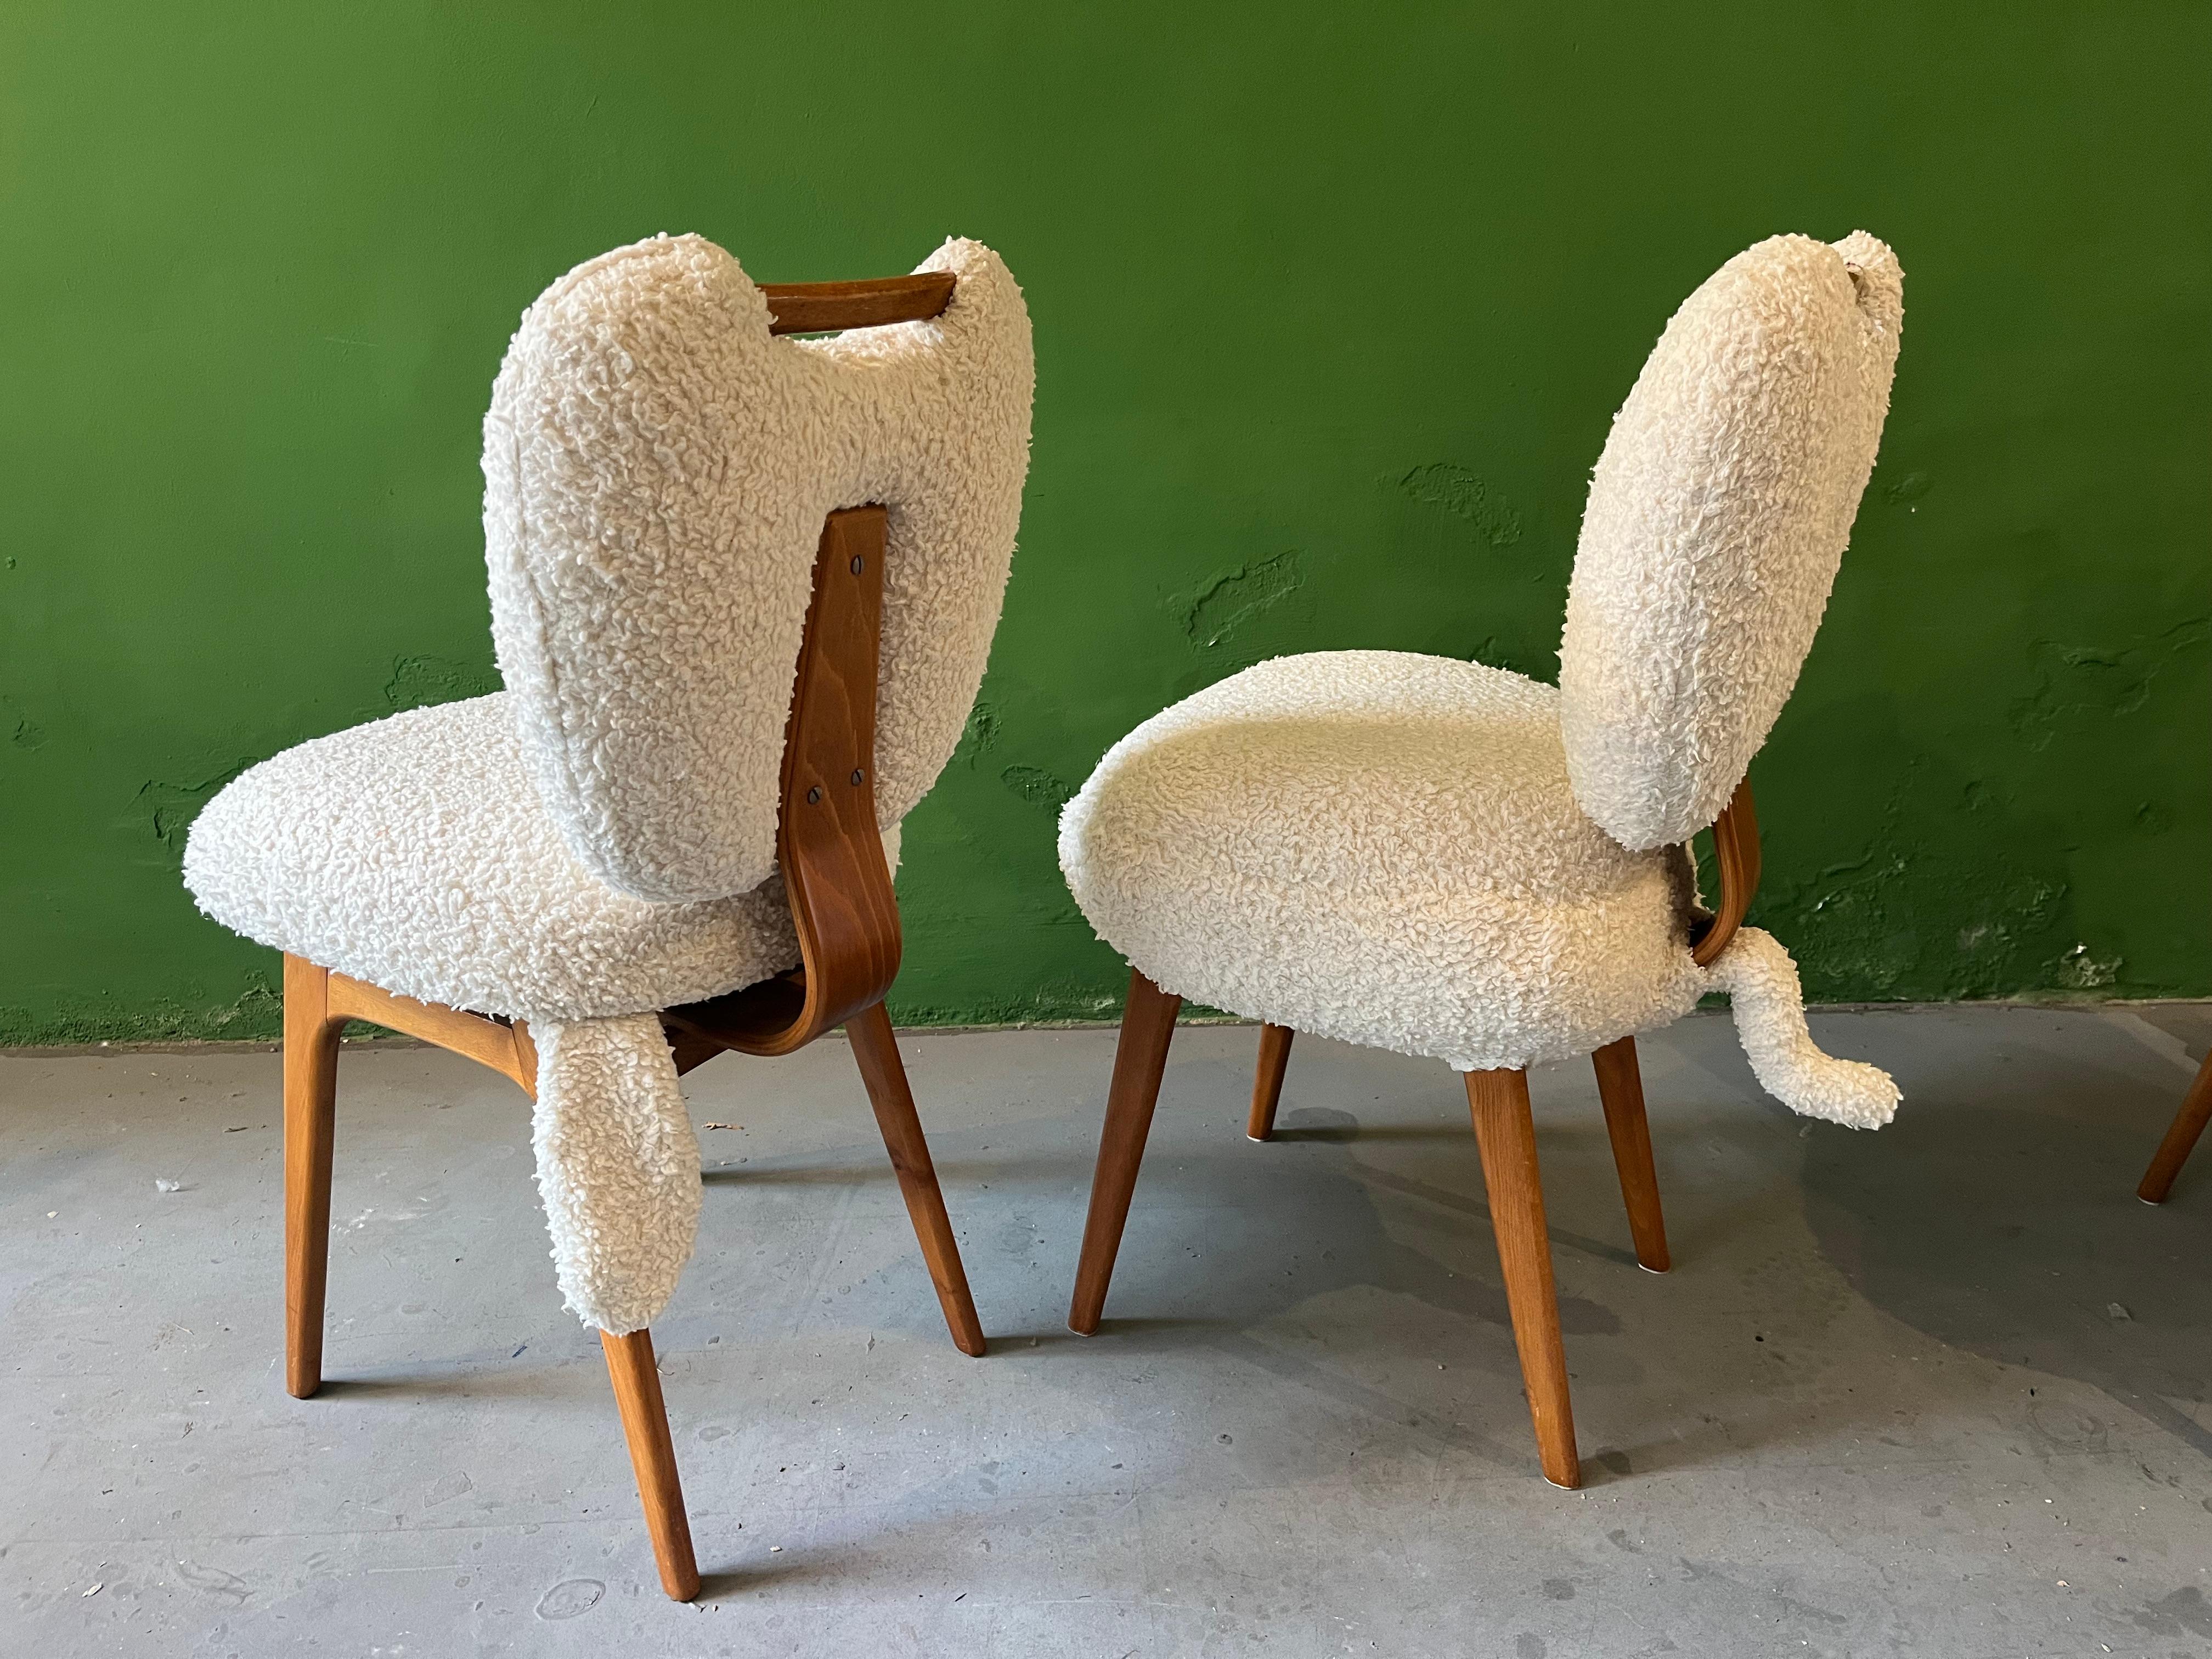 Appliqué 4 white Teddy Chairs by Markus Friedrich Staab  For Sale